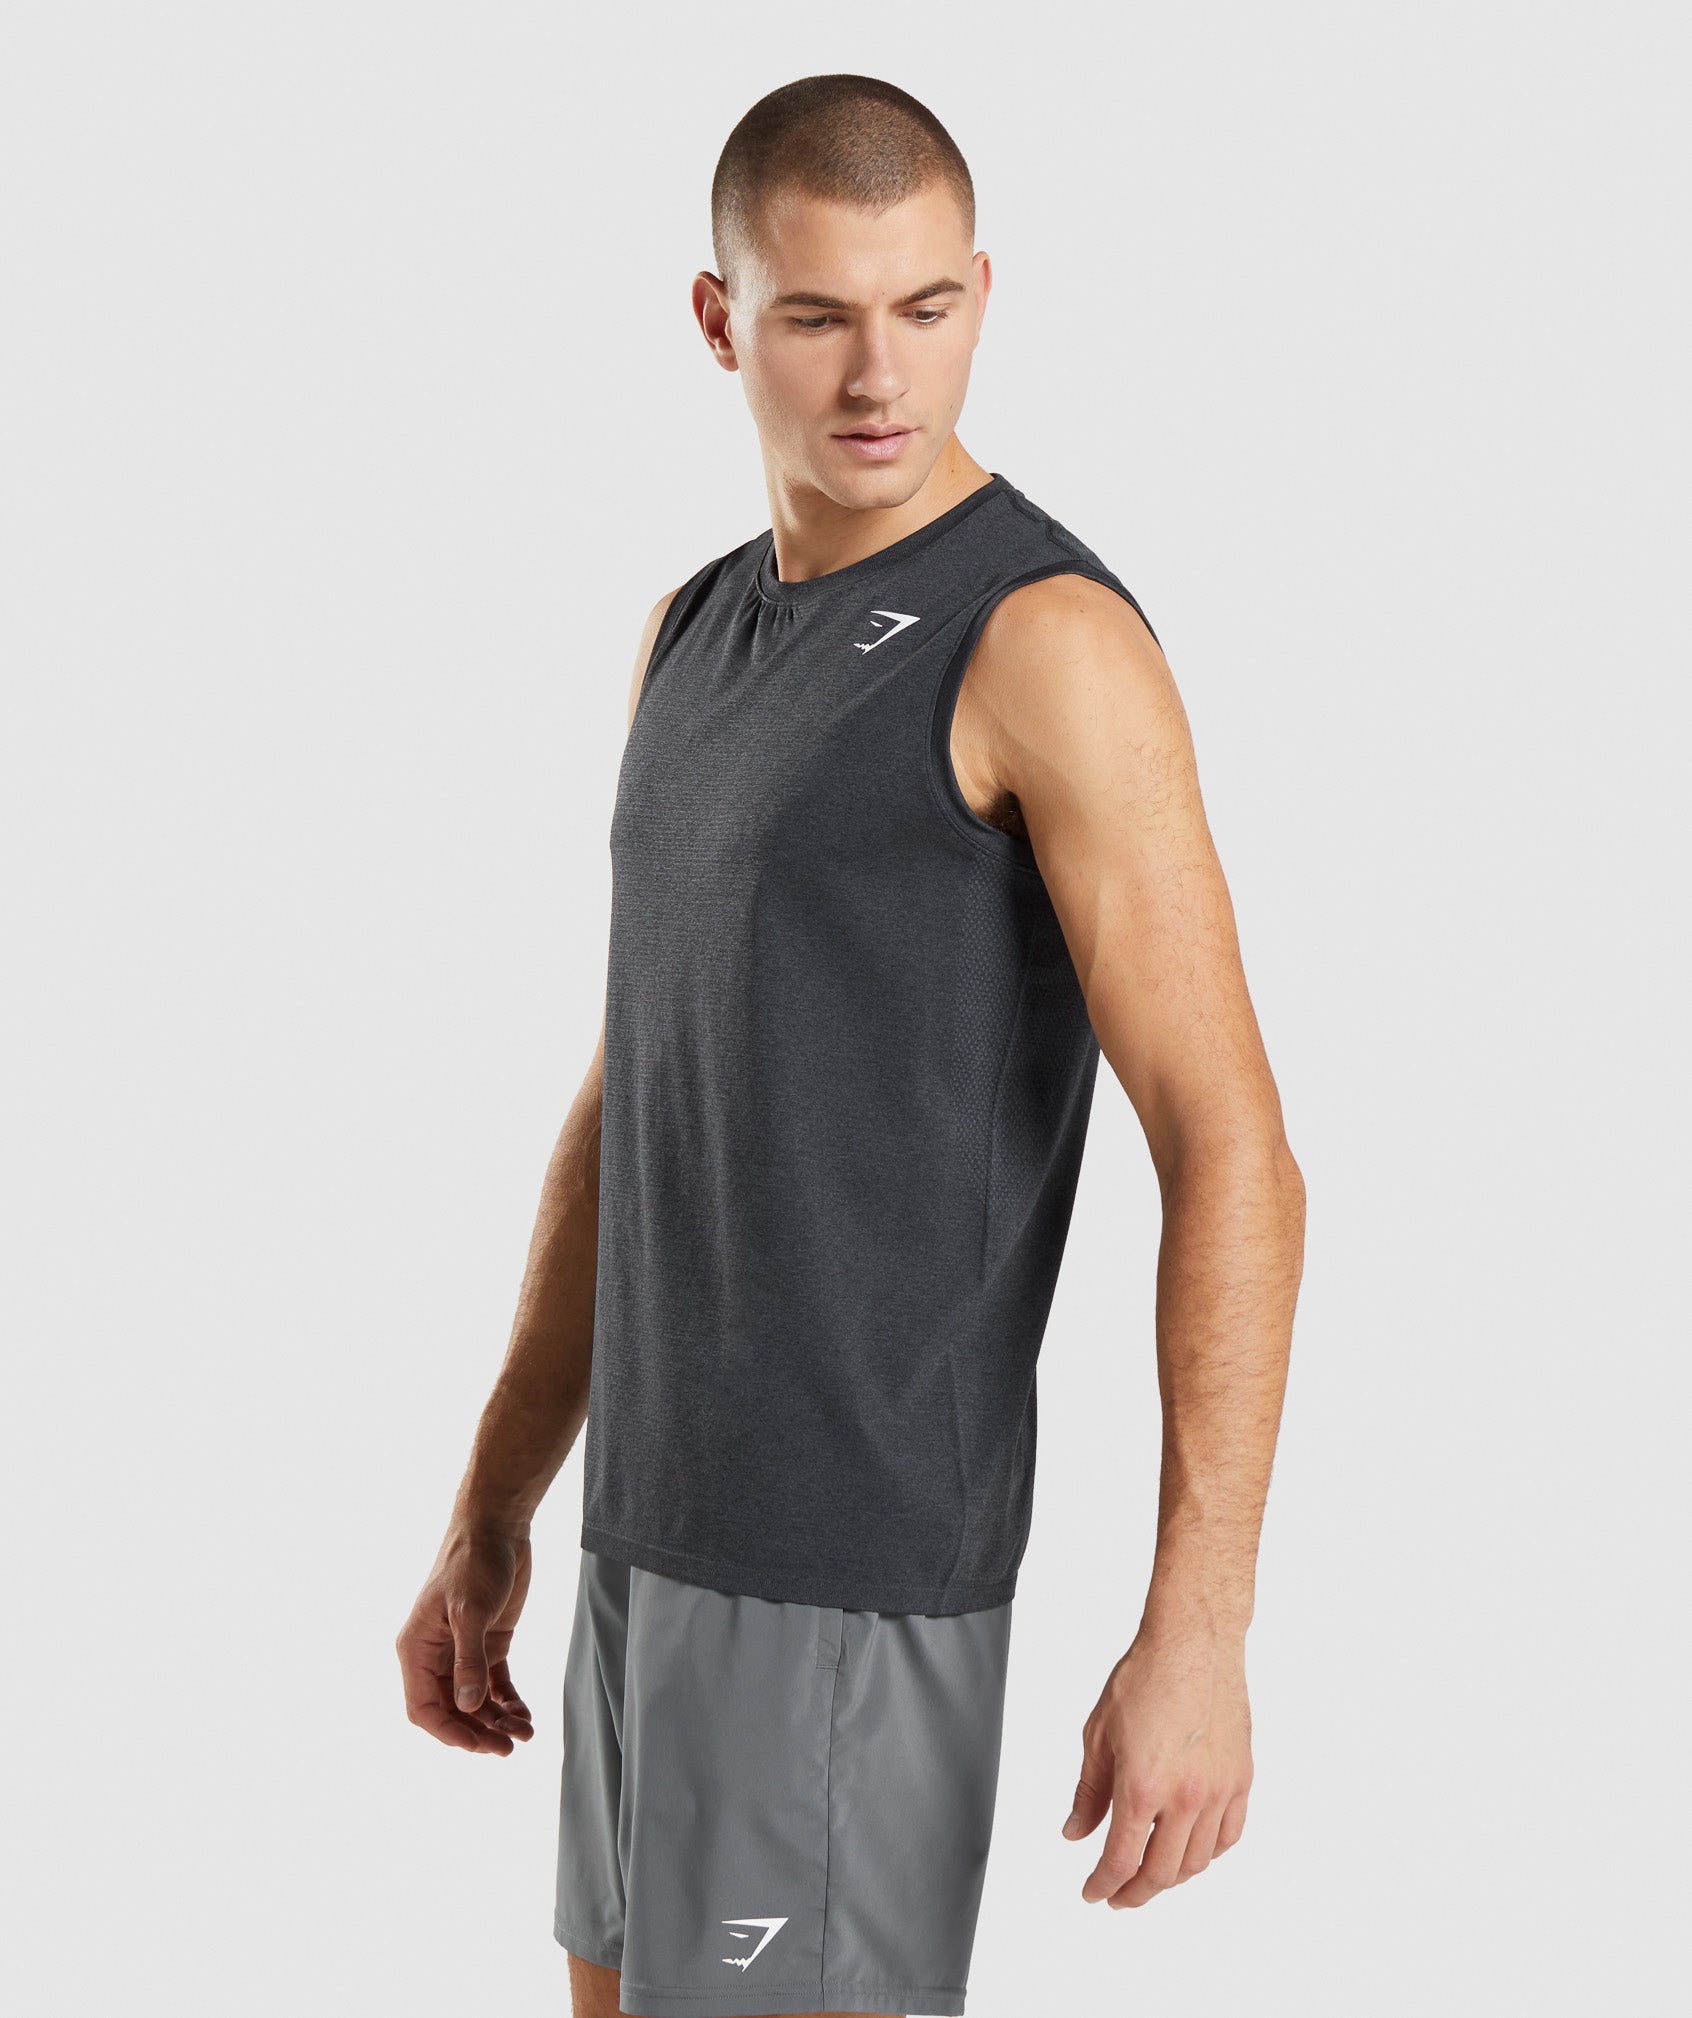 Arrival Seamless Tank in Black Marl - view 3